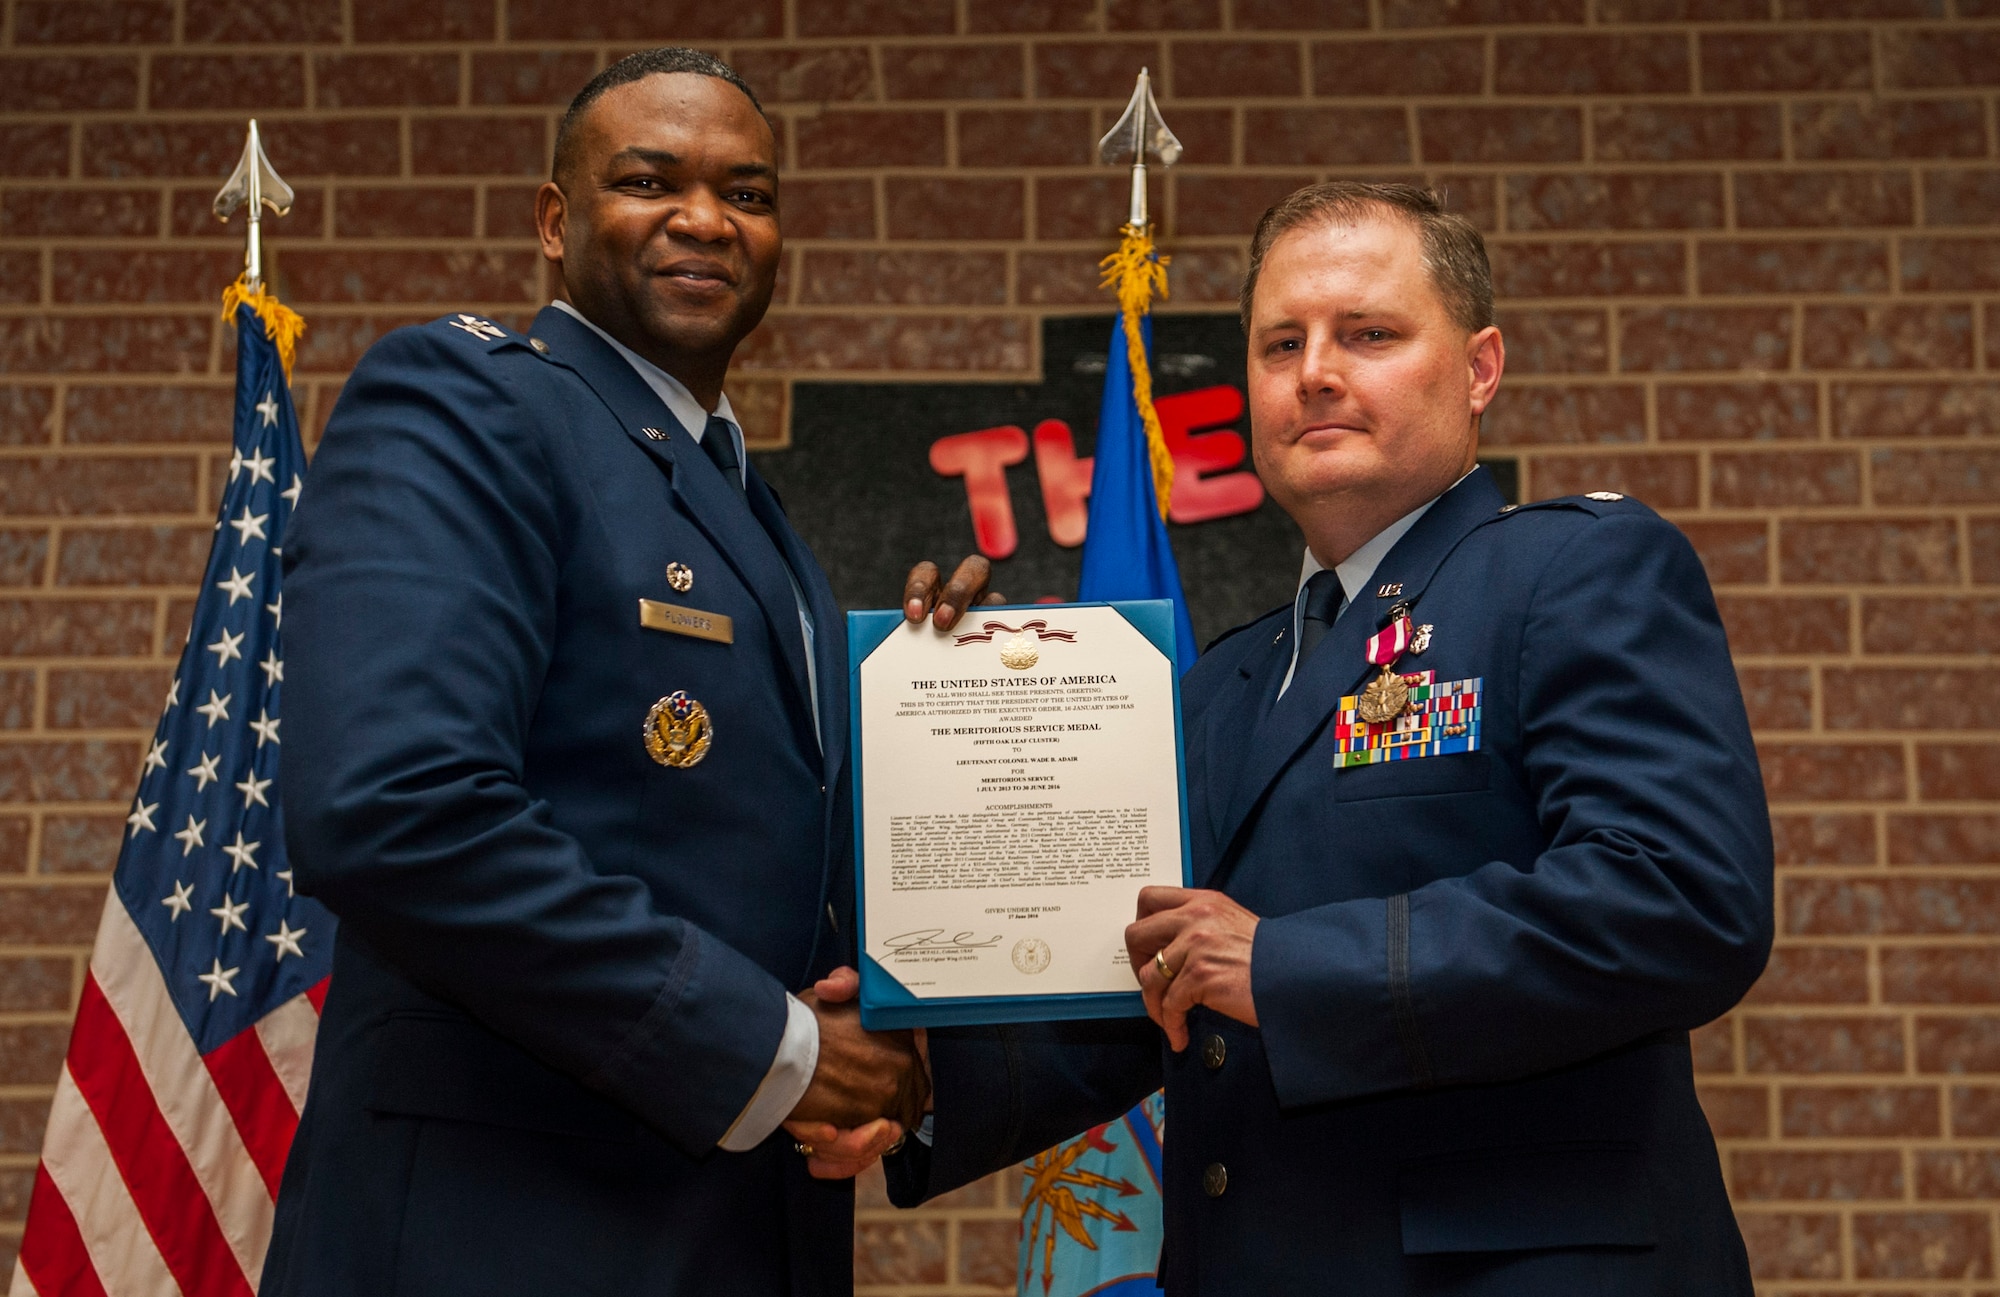 U.S. Air Force Col. Alfred Flowers, 52nd Medical Group commander, left, and U.S. Air Force Lt. Col. Wade Adair, outgoing 52nd Medical Support Squadron commander, hold up a certificate of the Meritorious Service Medal during the 52nd MDSS change of command ceremony in the Brickhouse on Spangdahlem Air Base, Germany, June 30, 2016. Adair received a Meritorious Service Medal in recognition of his service of leading the 52nd MDSS. (U.S. Air Force photo by Airman 1st Class Timothy Kim/Released)